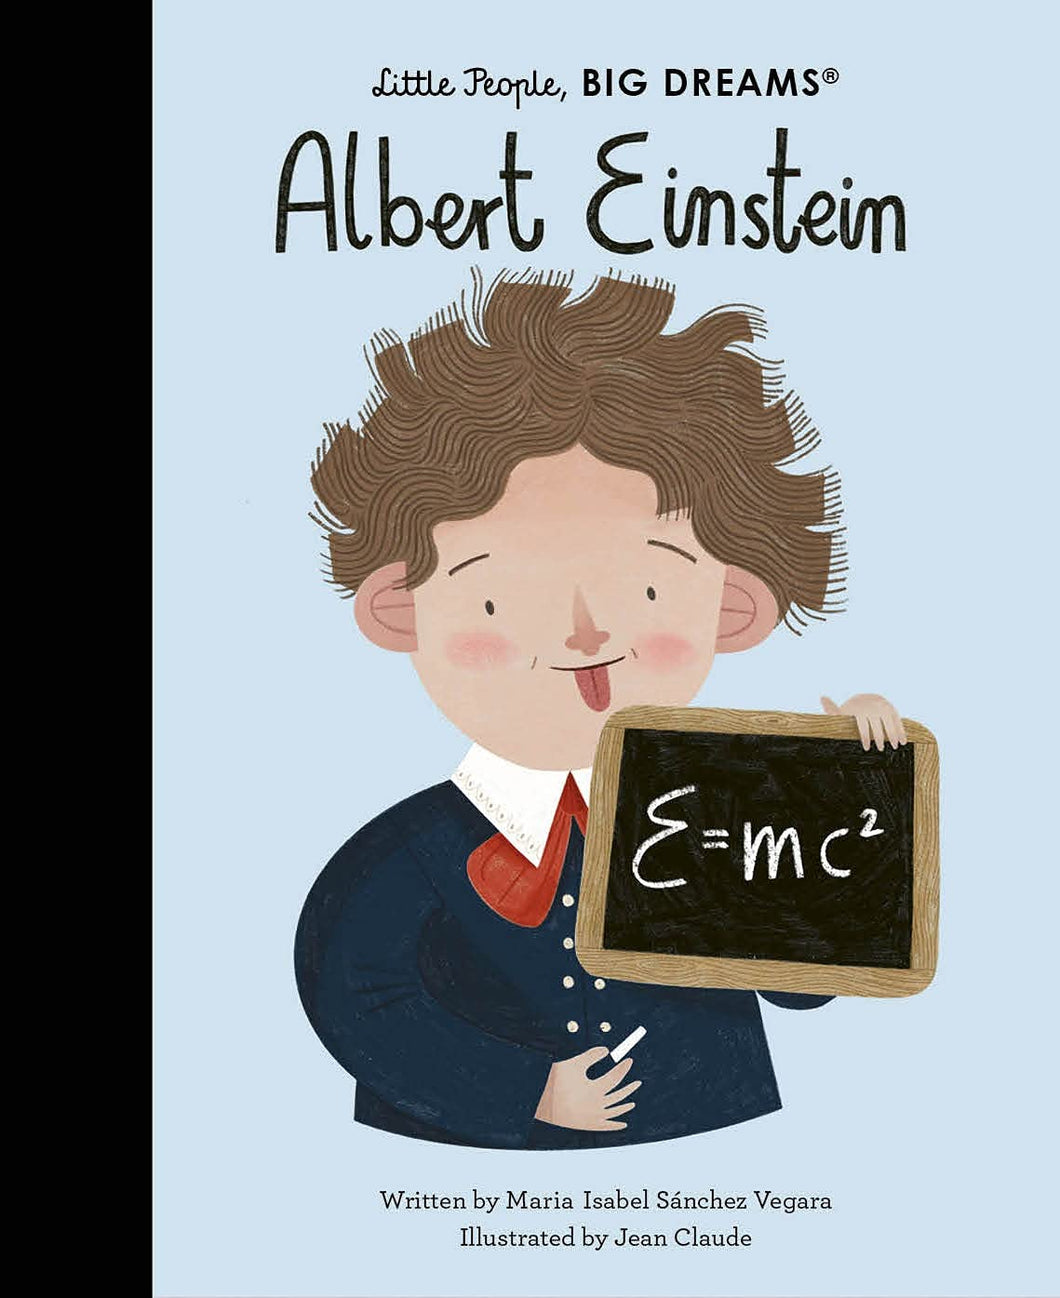 Book cover shows Albert Einstein (a white man) sticking out his tongue and holding up a small slate with 'E=Mc2' written in chalk.